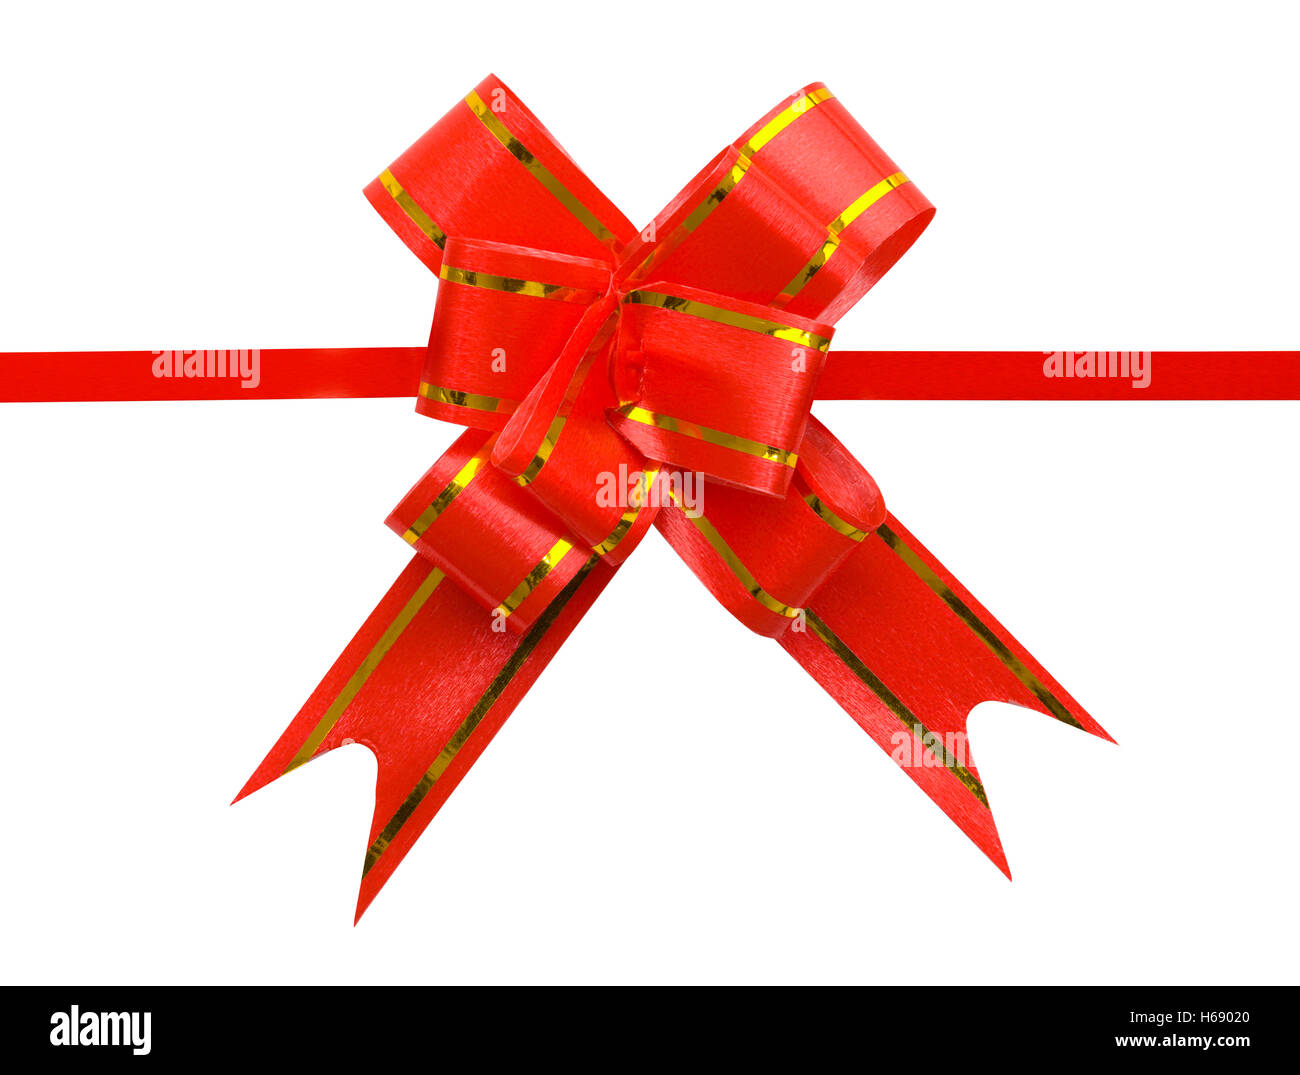 Fancy Red Present Bow Isolated on White Background. Stock Photo